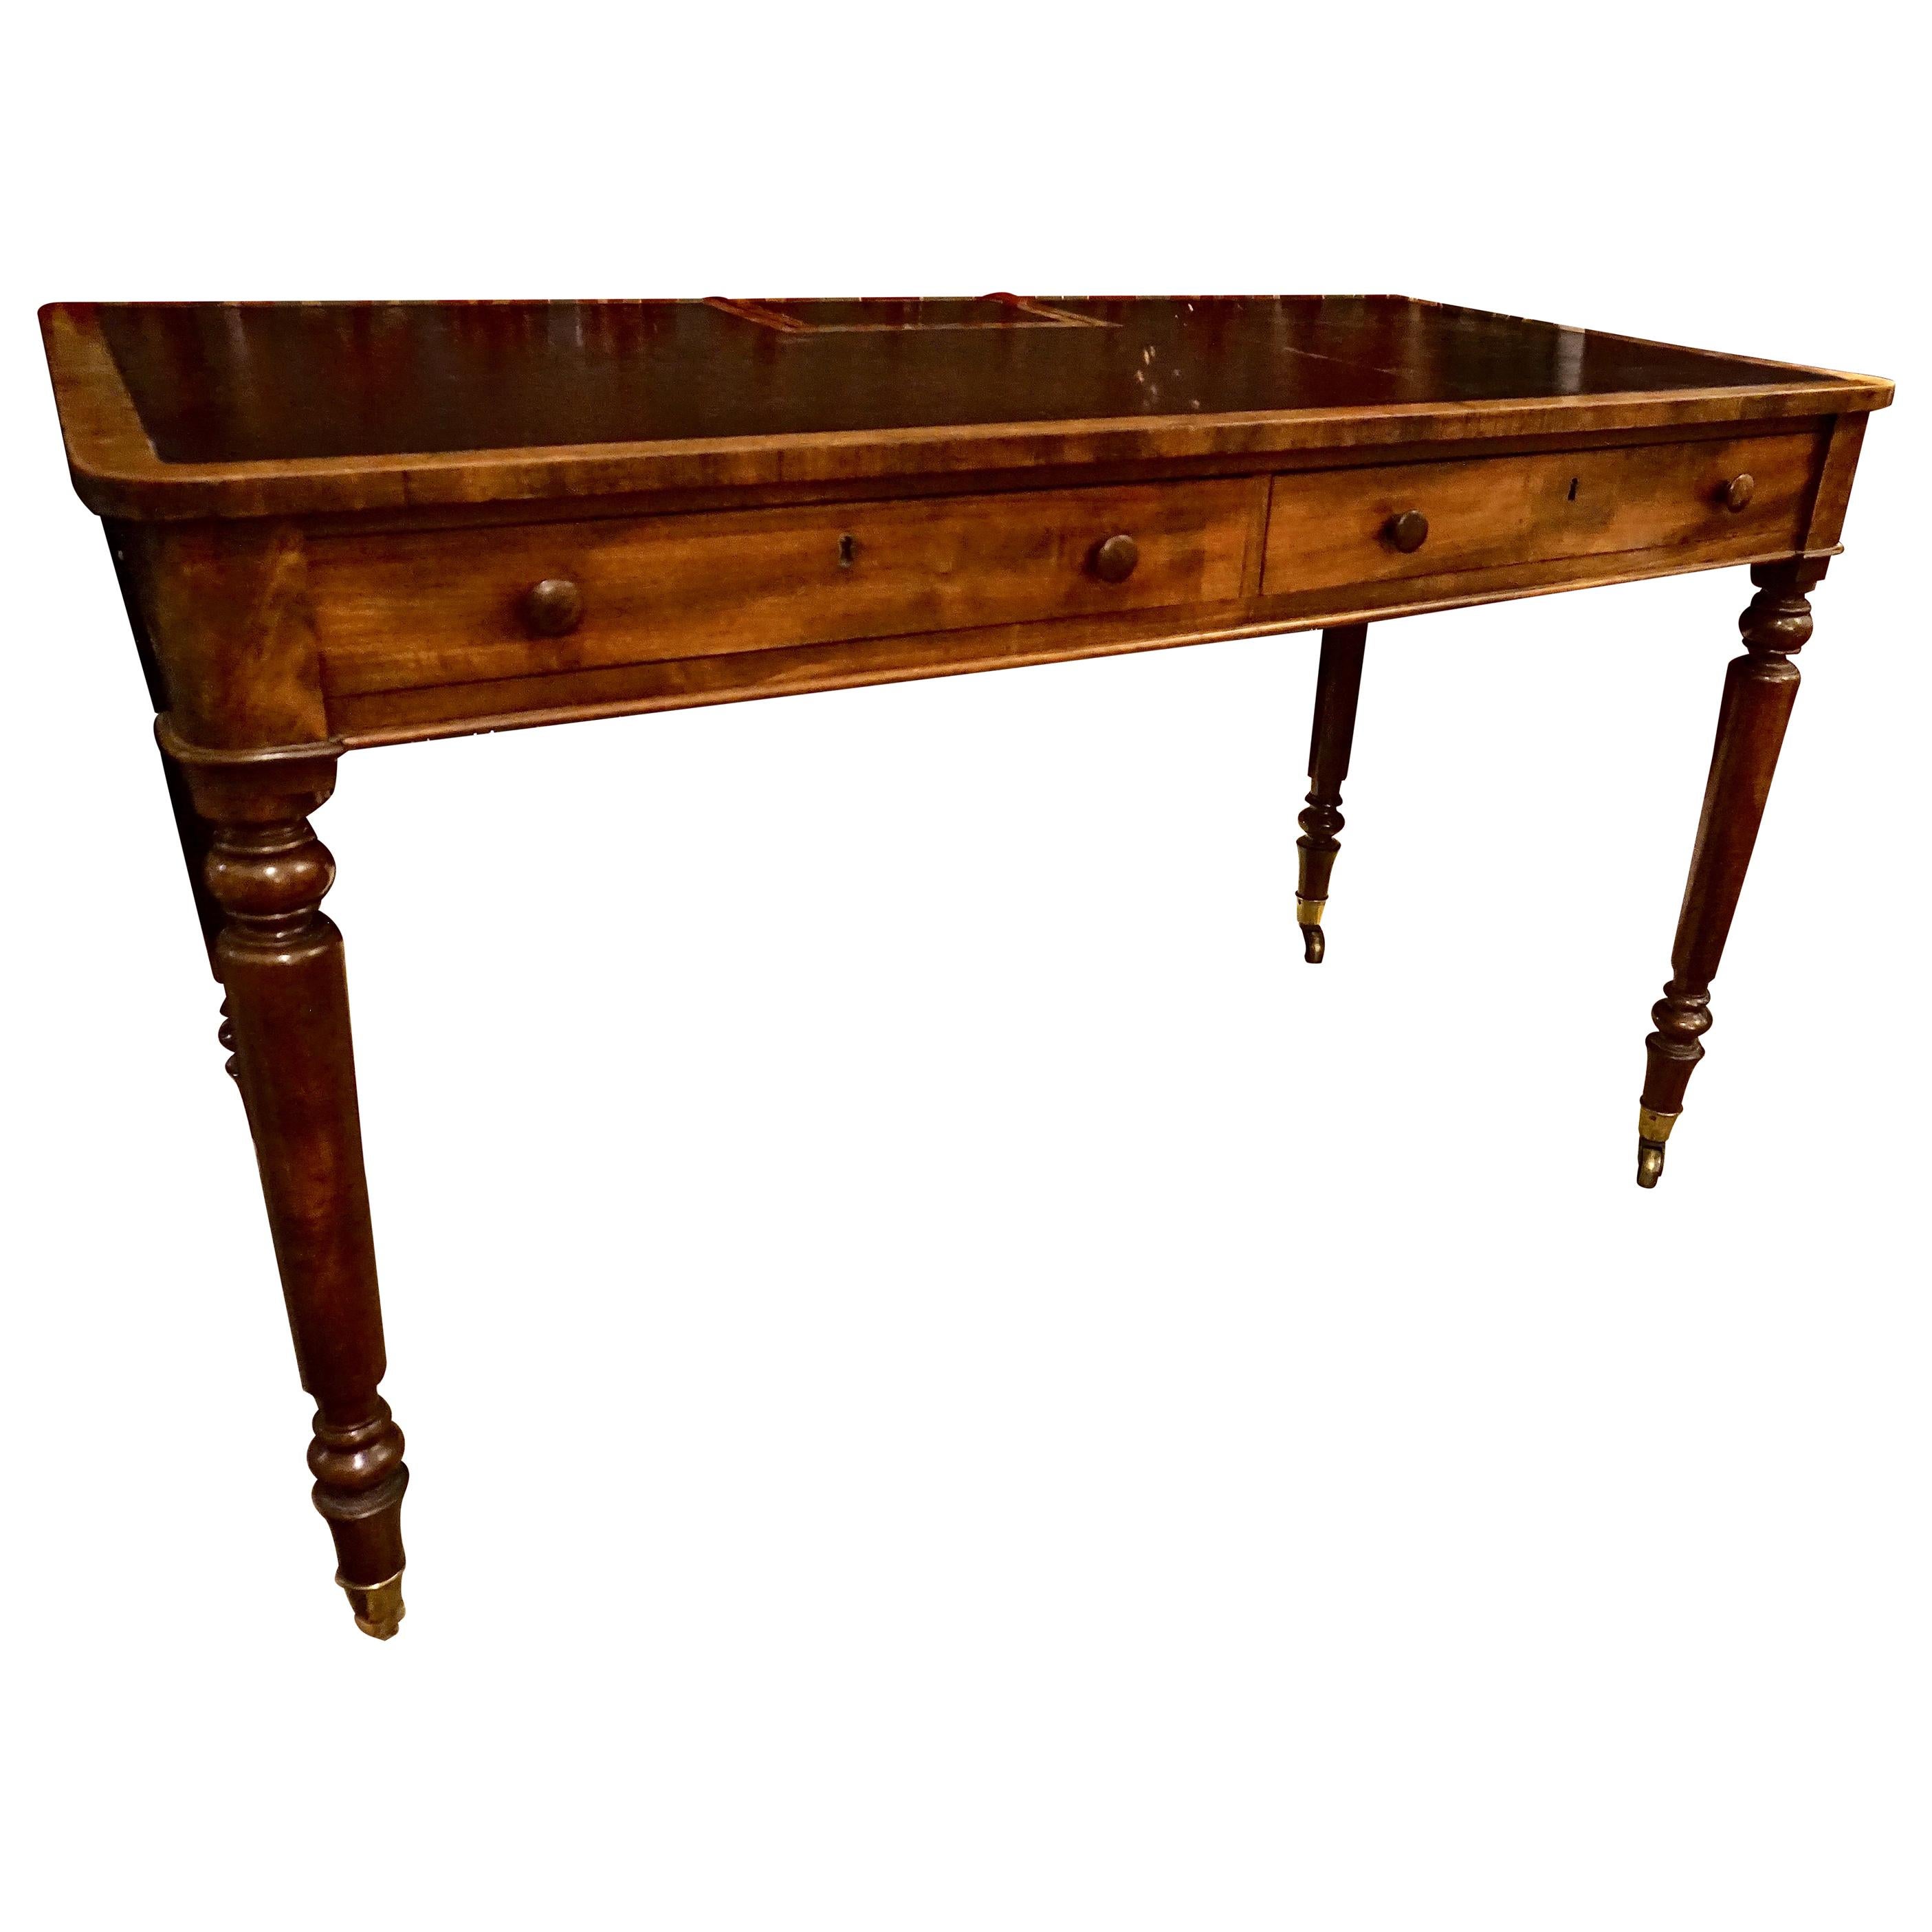 Early 19th Century Mahogany Gillows Lancaster Writing Desk on Casters